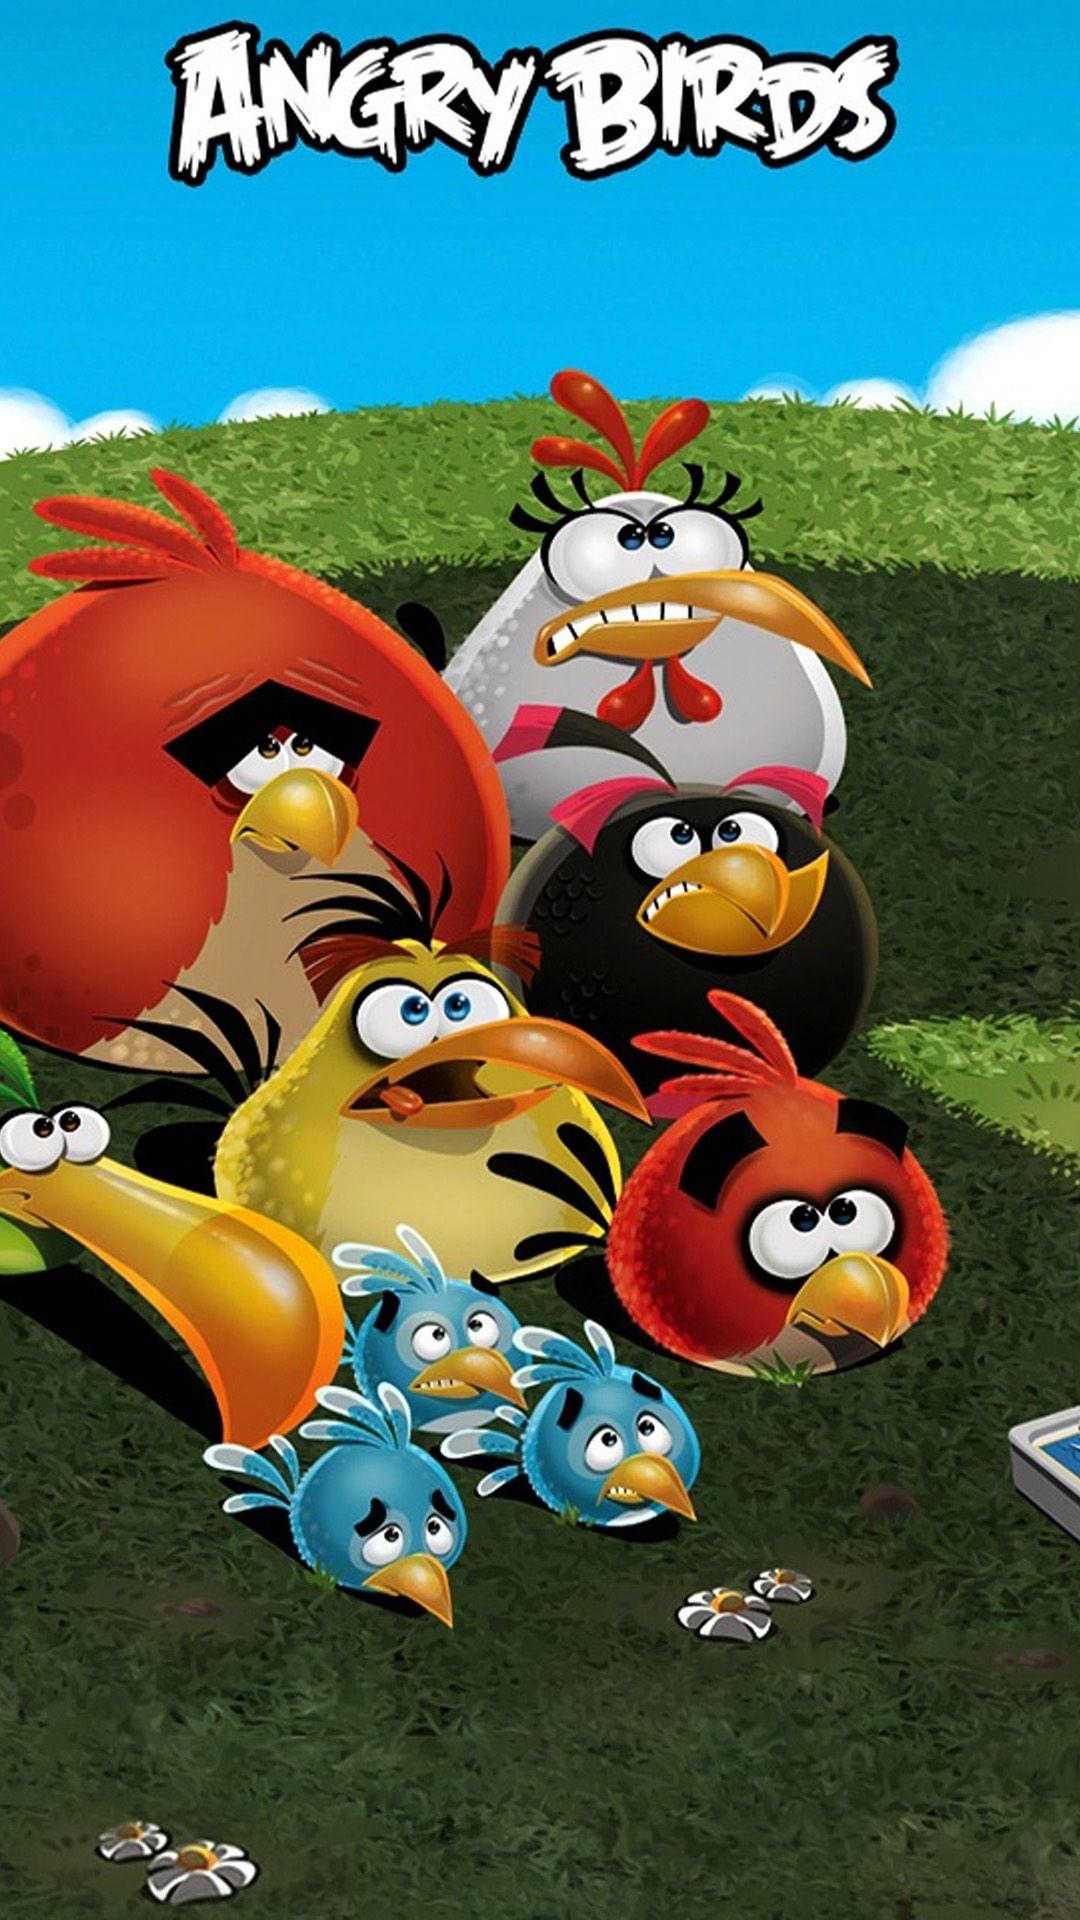 iPhone 6 plus Angry Birds 08 HD Wallpaper. The angry birds movie